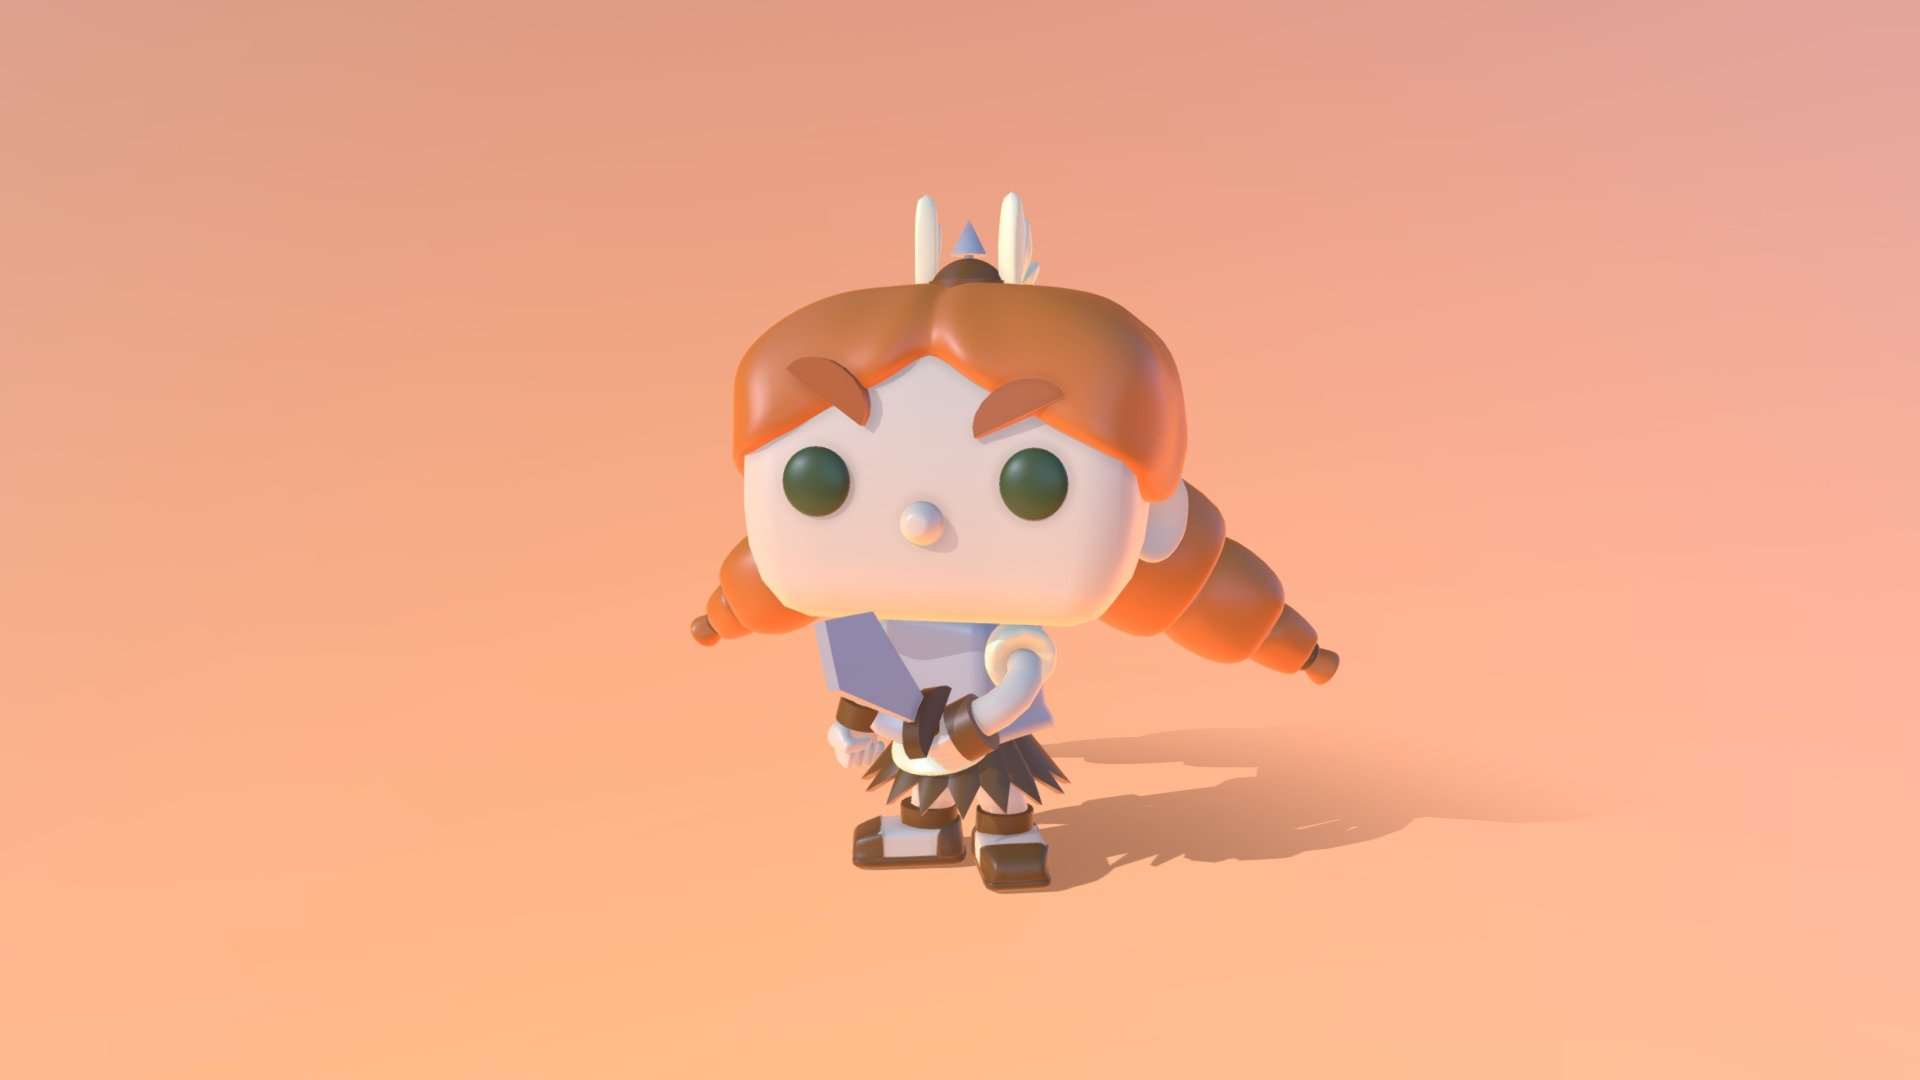 A character I created that was brought into the Funko Pop realm - Little Valkyrie Funko Pop Design - 3D model by MadiRitter 3d model